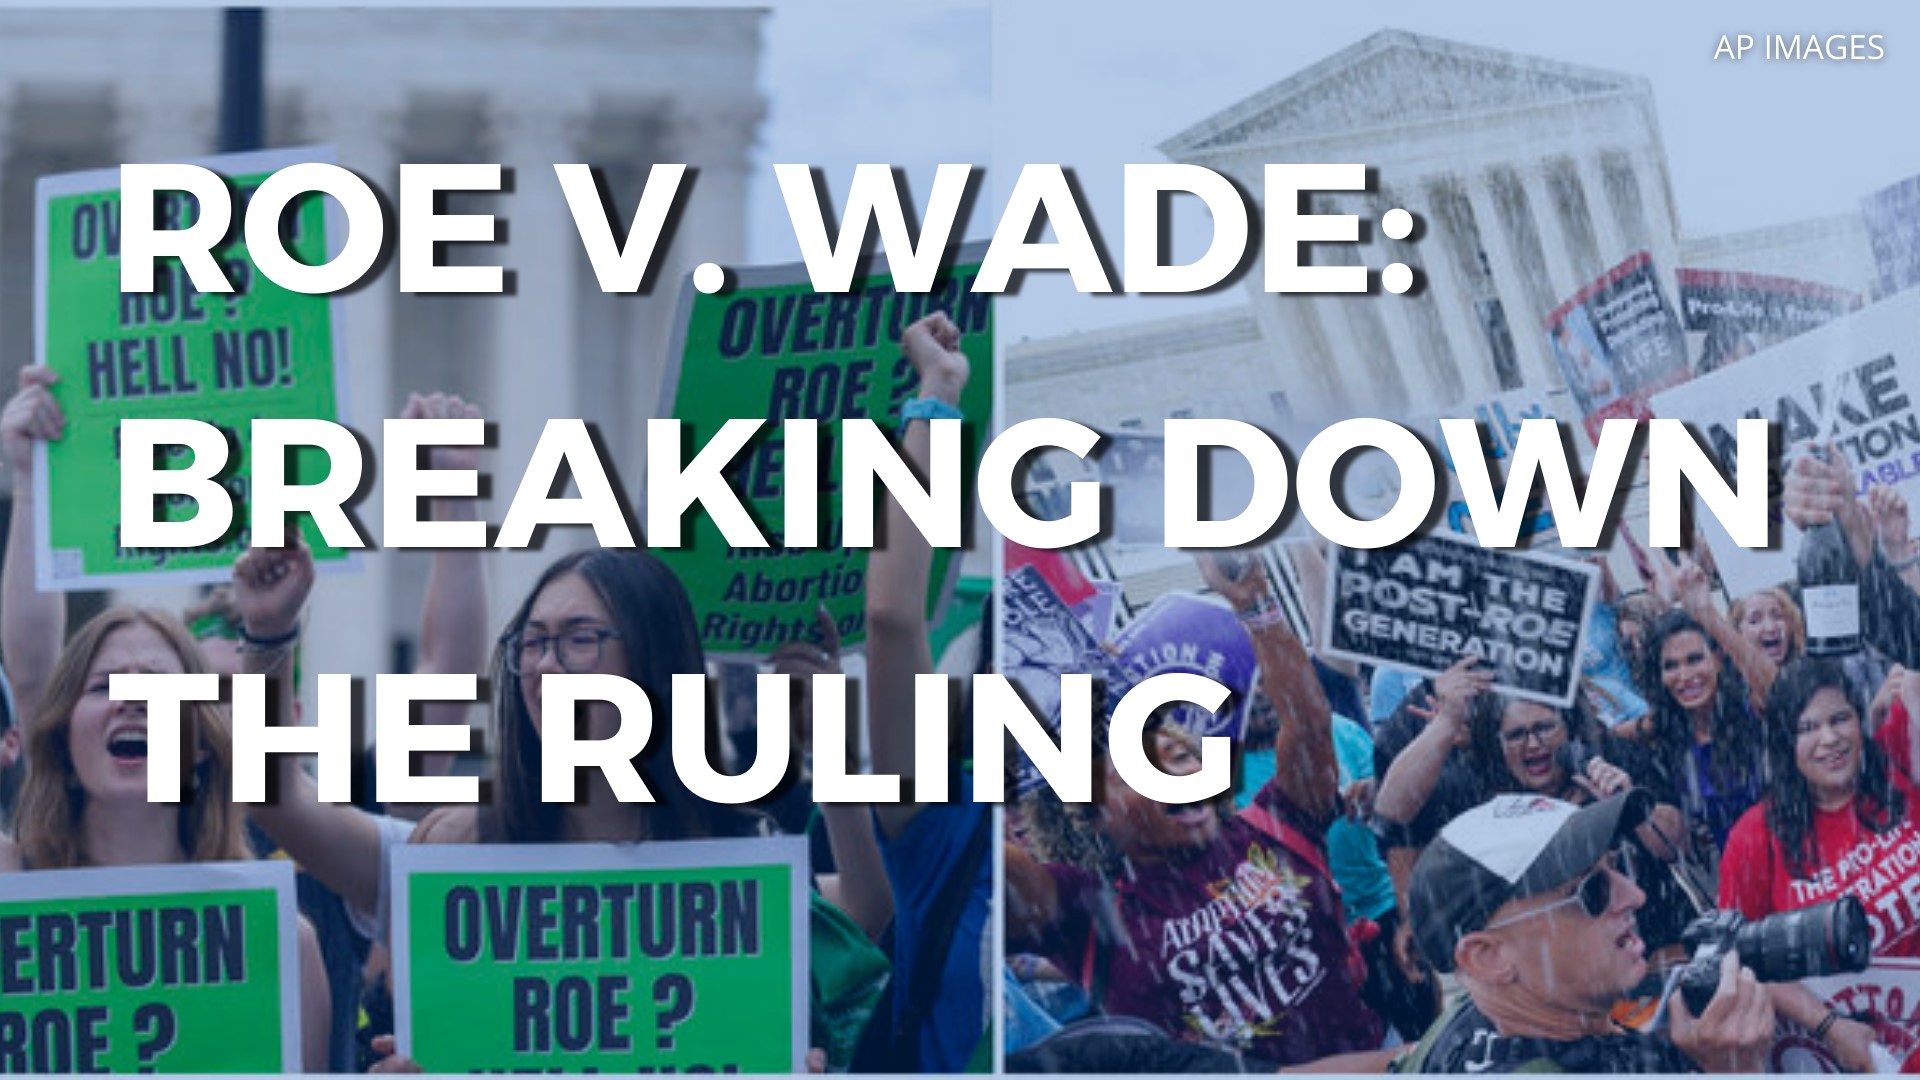 States now have the power to decide on abortion rights. A look at how we got here and the history of Roe v. Wade.